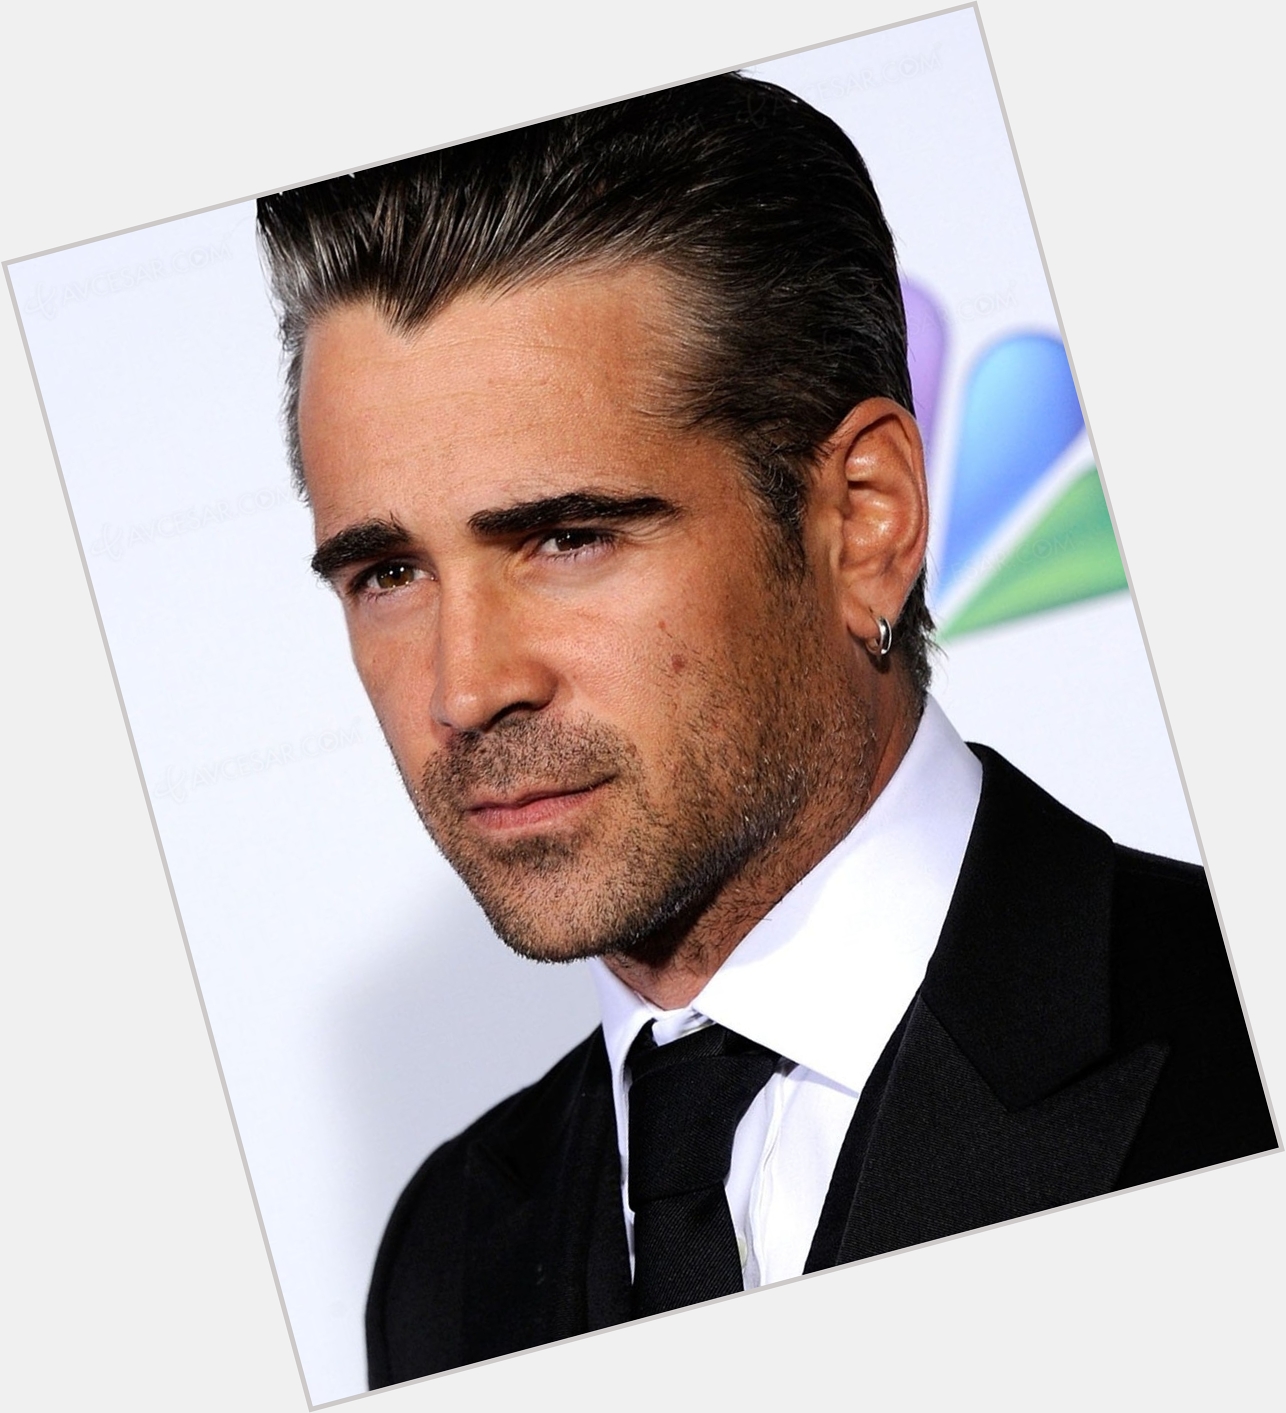  Happy birthday to Colin Farrell who portrayed Percival Graves in the first film! 